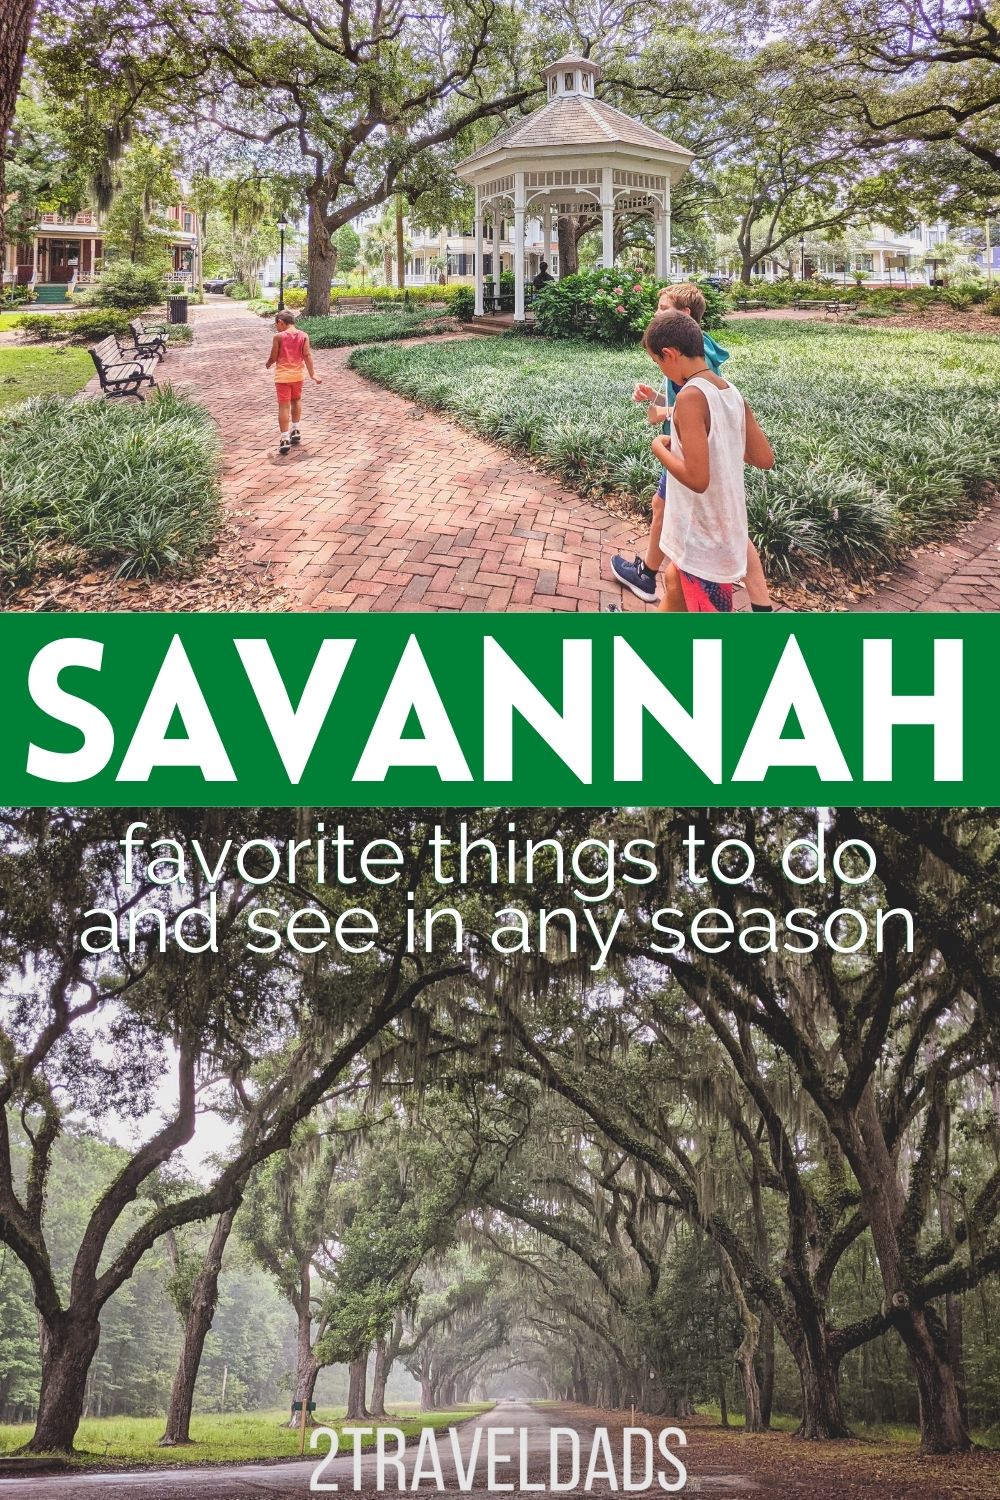 There are tons of things to do in Savannah since it's beautiful in every season. These sights, activities and tours in Savannah are ideal for a short trip or a whole week enjoying Savannah and Tybee Island.